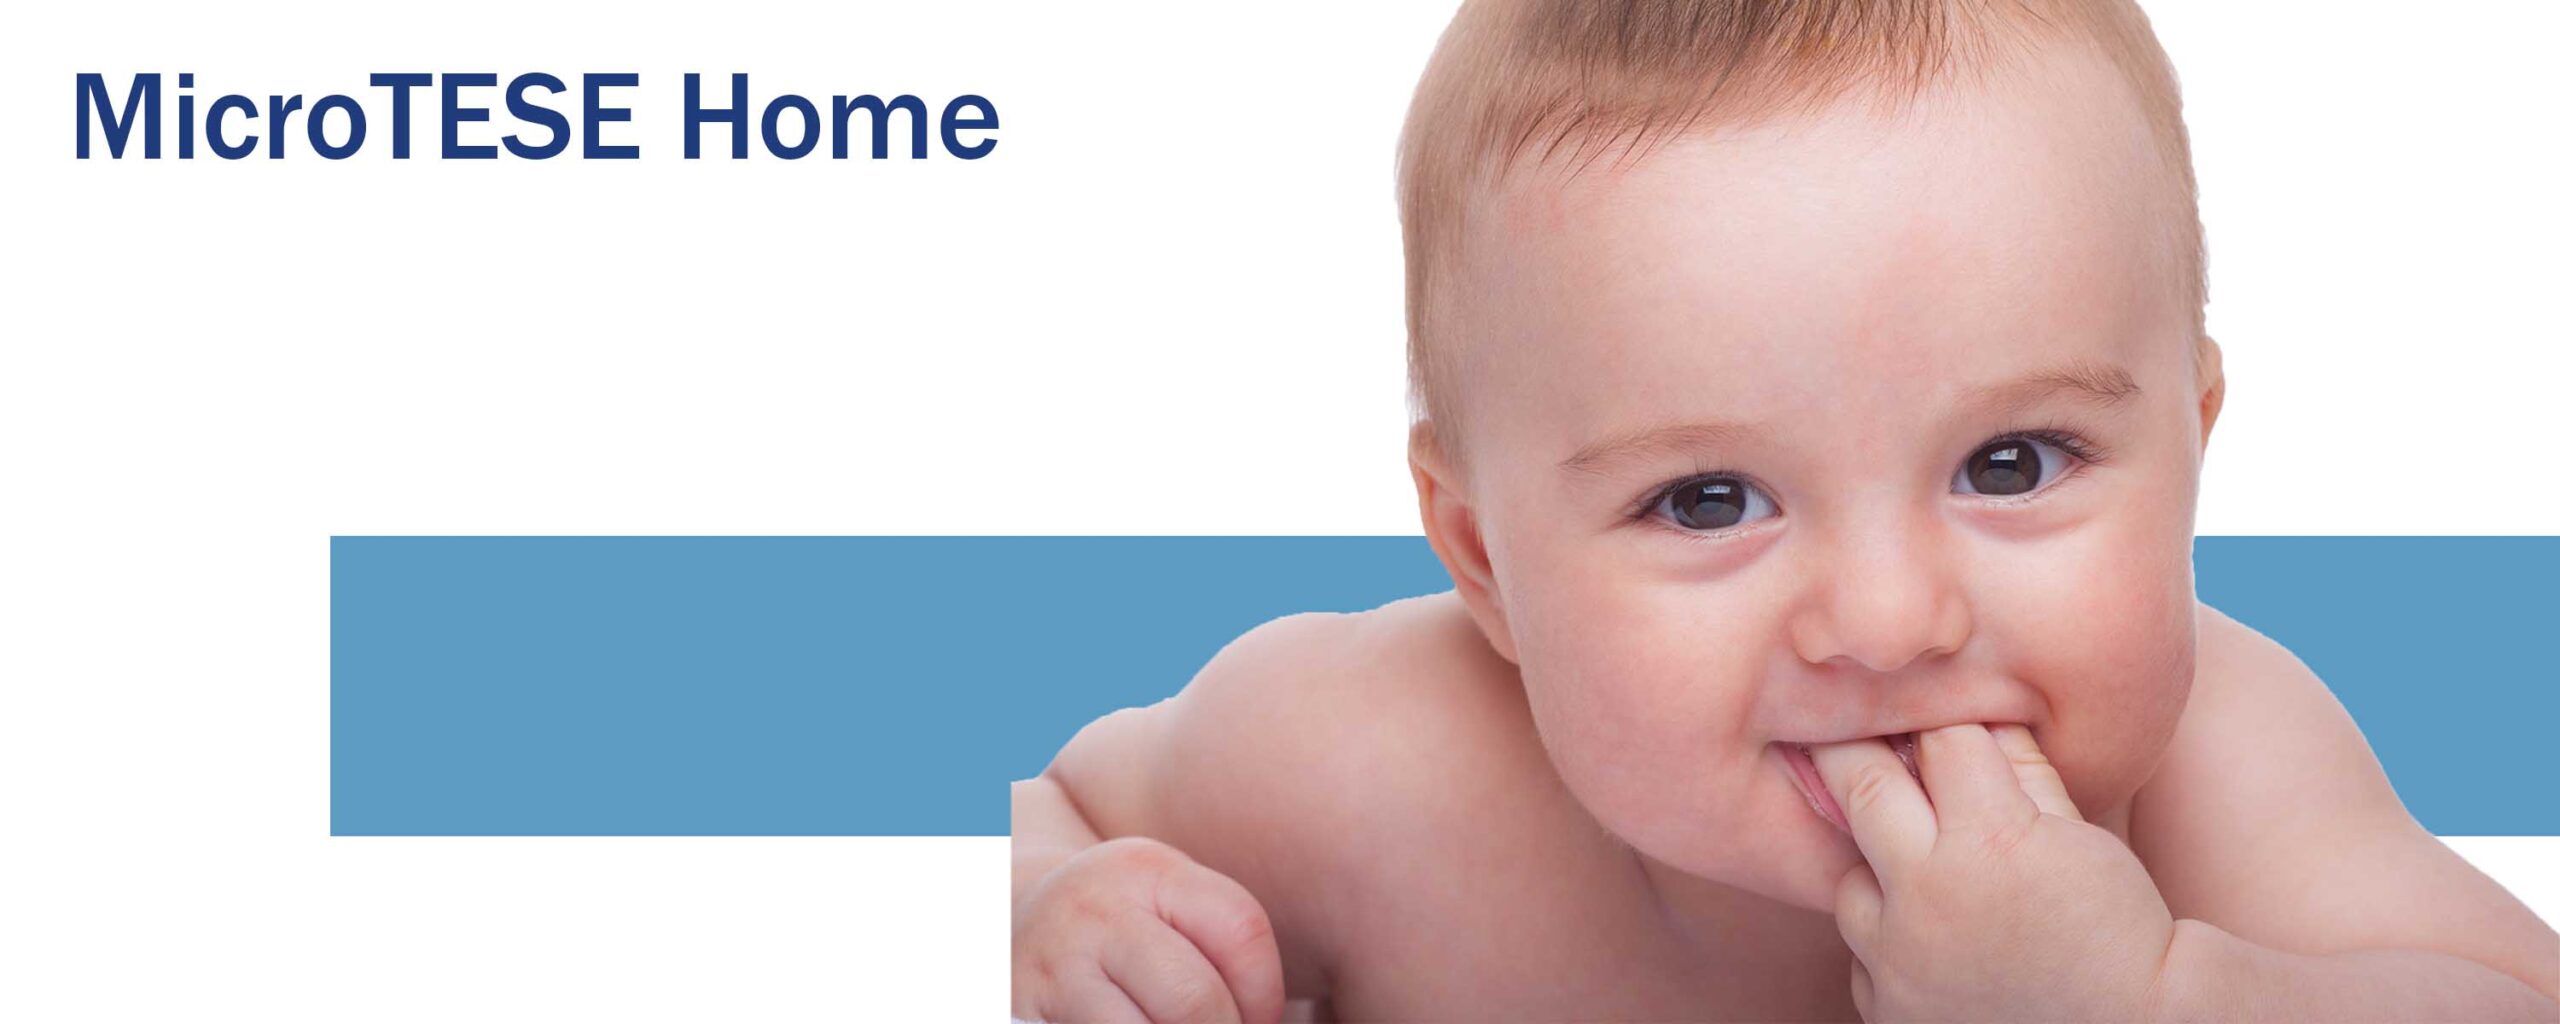 microTESE Home - Male Fertility and Peyronie's Clinic